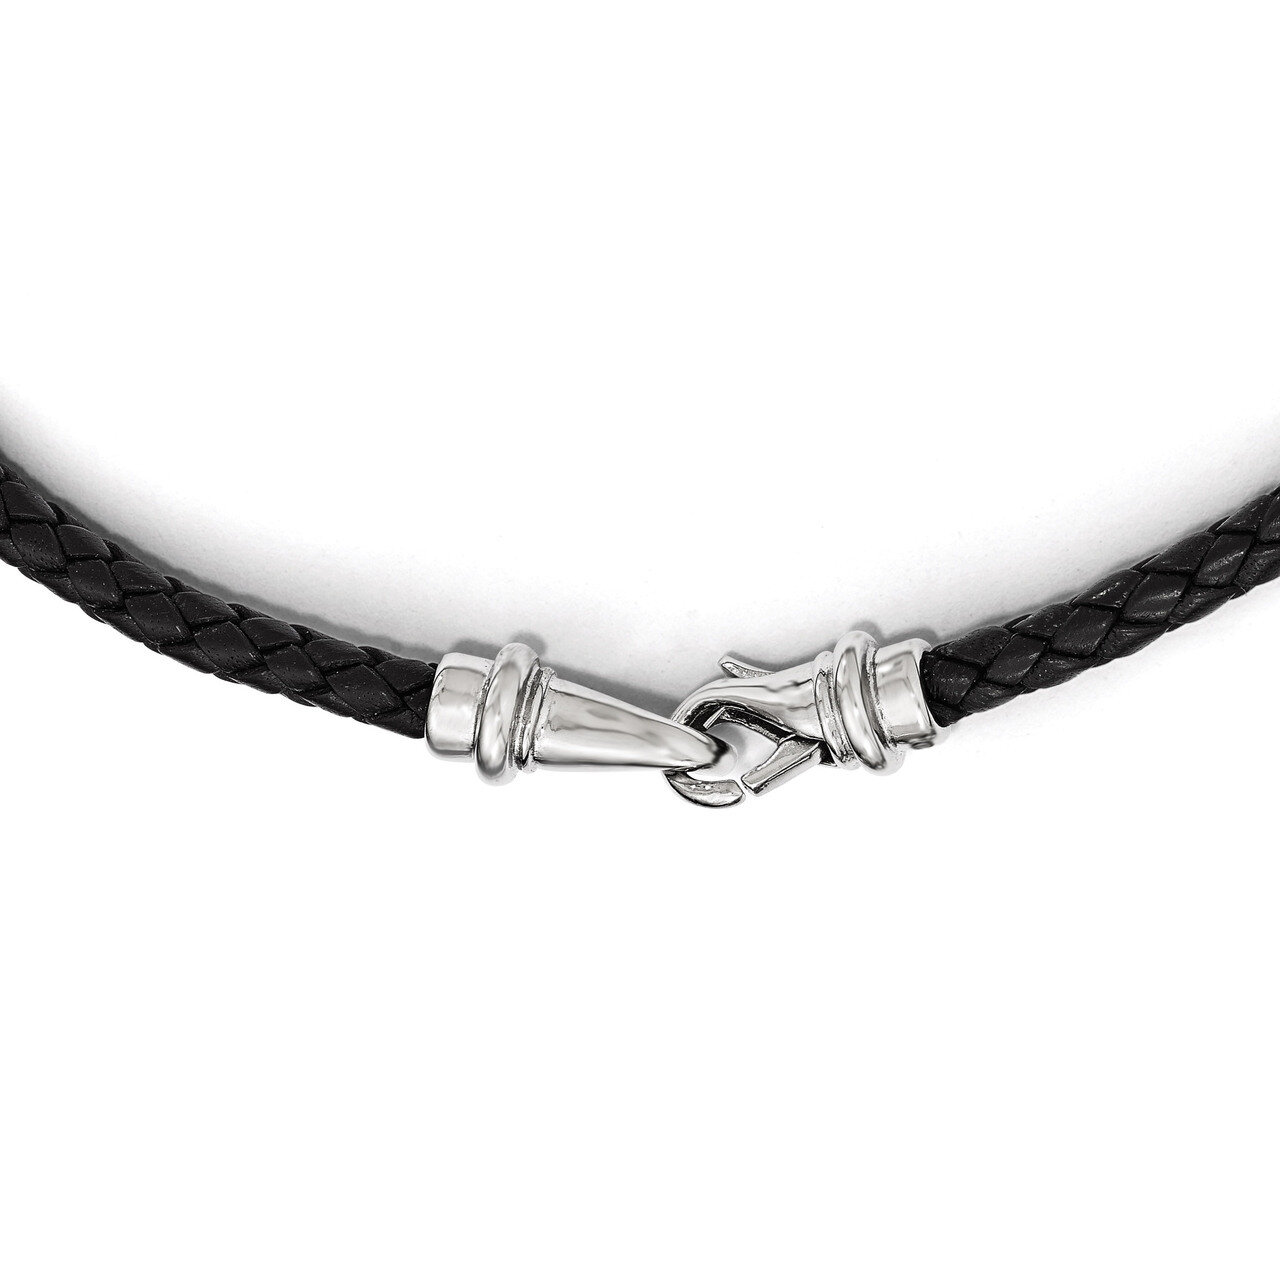 Polished Woven Black Leather Necklace - Stainless Steel SRN1802-16.25